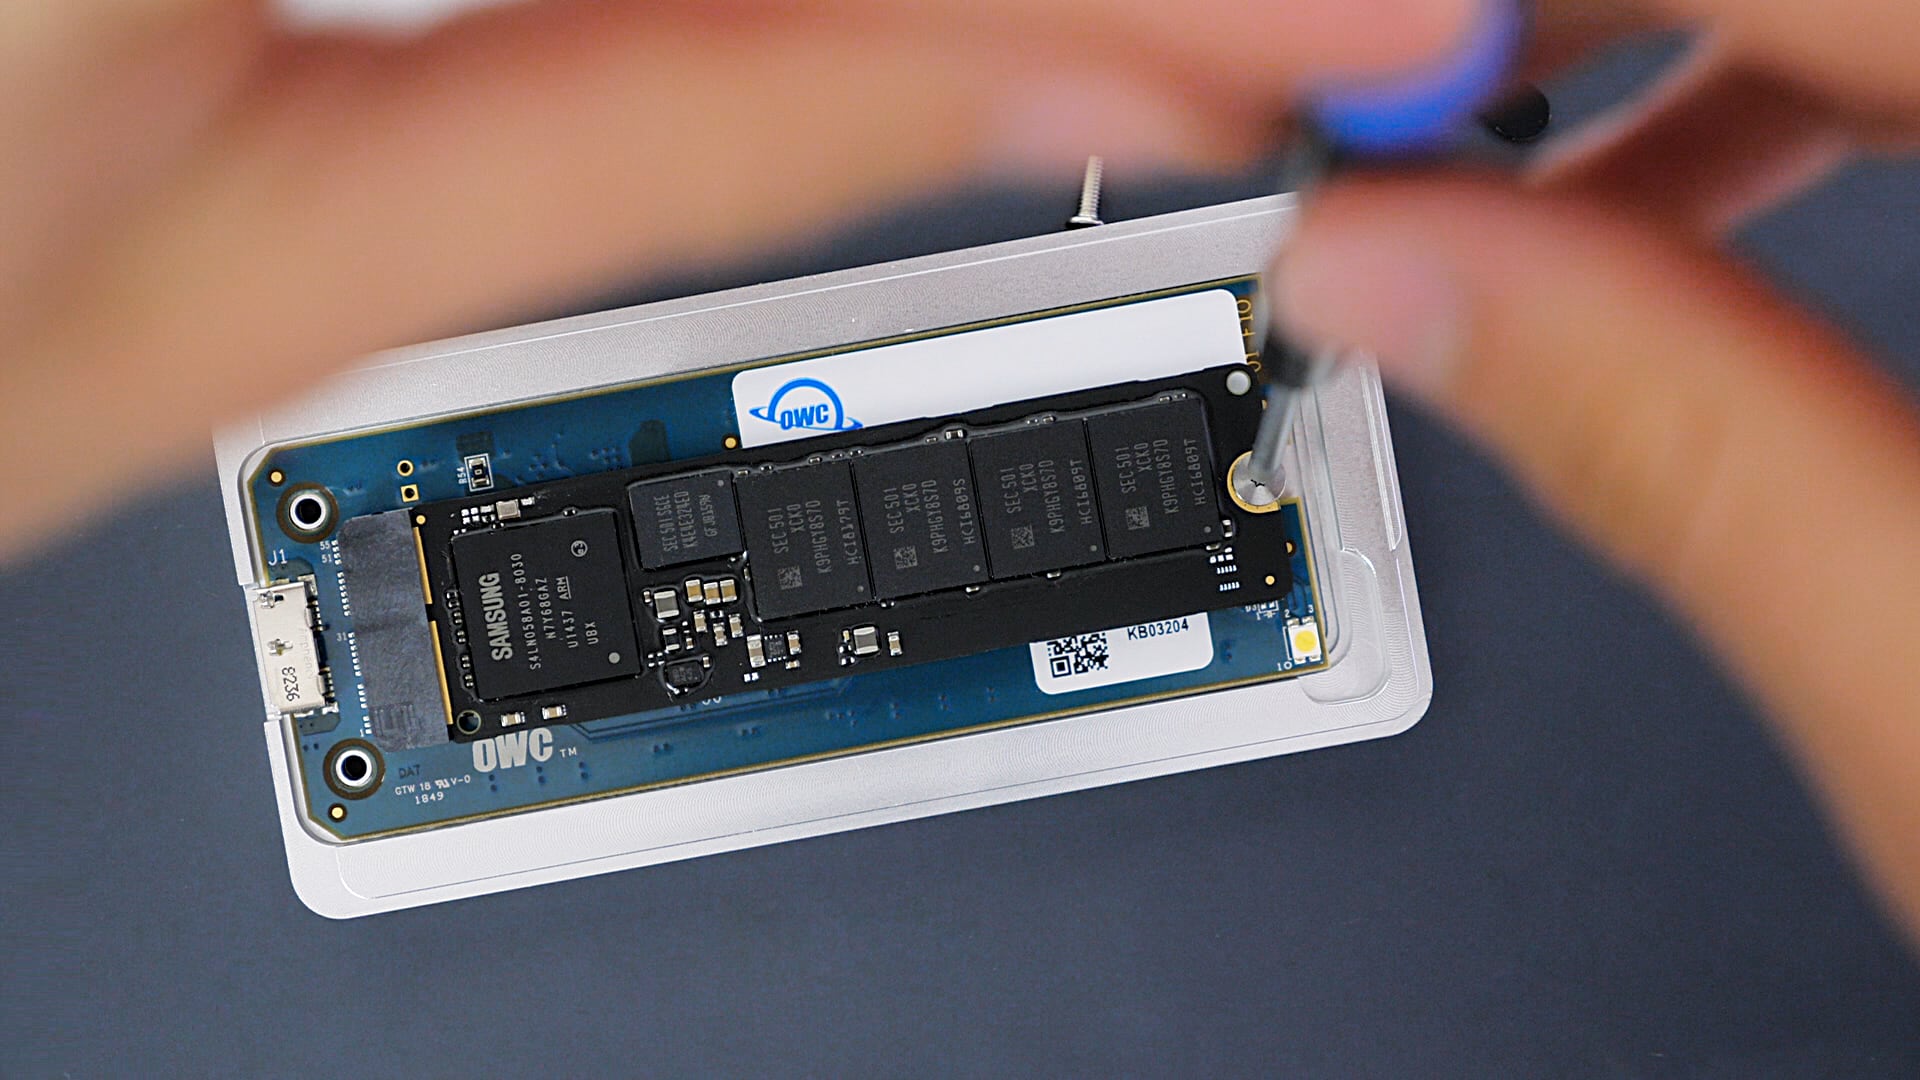 How to upgrade Mac SSD